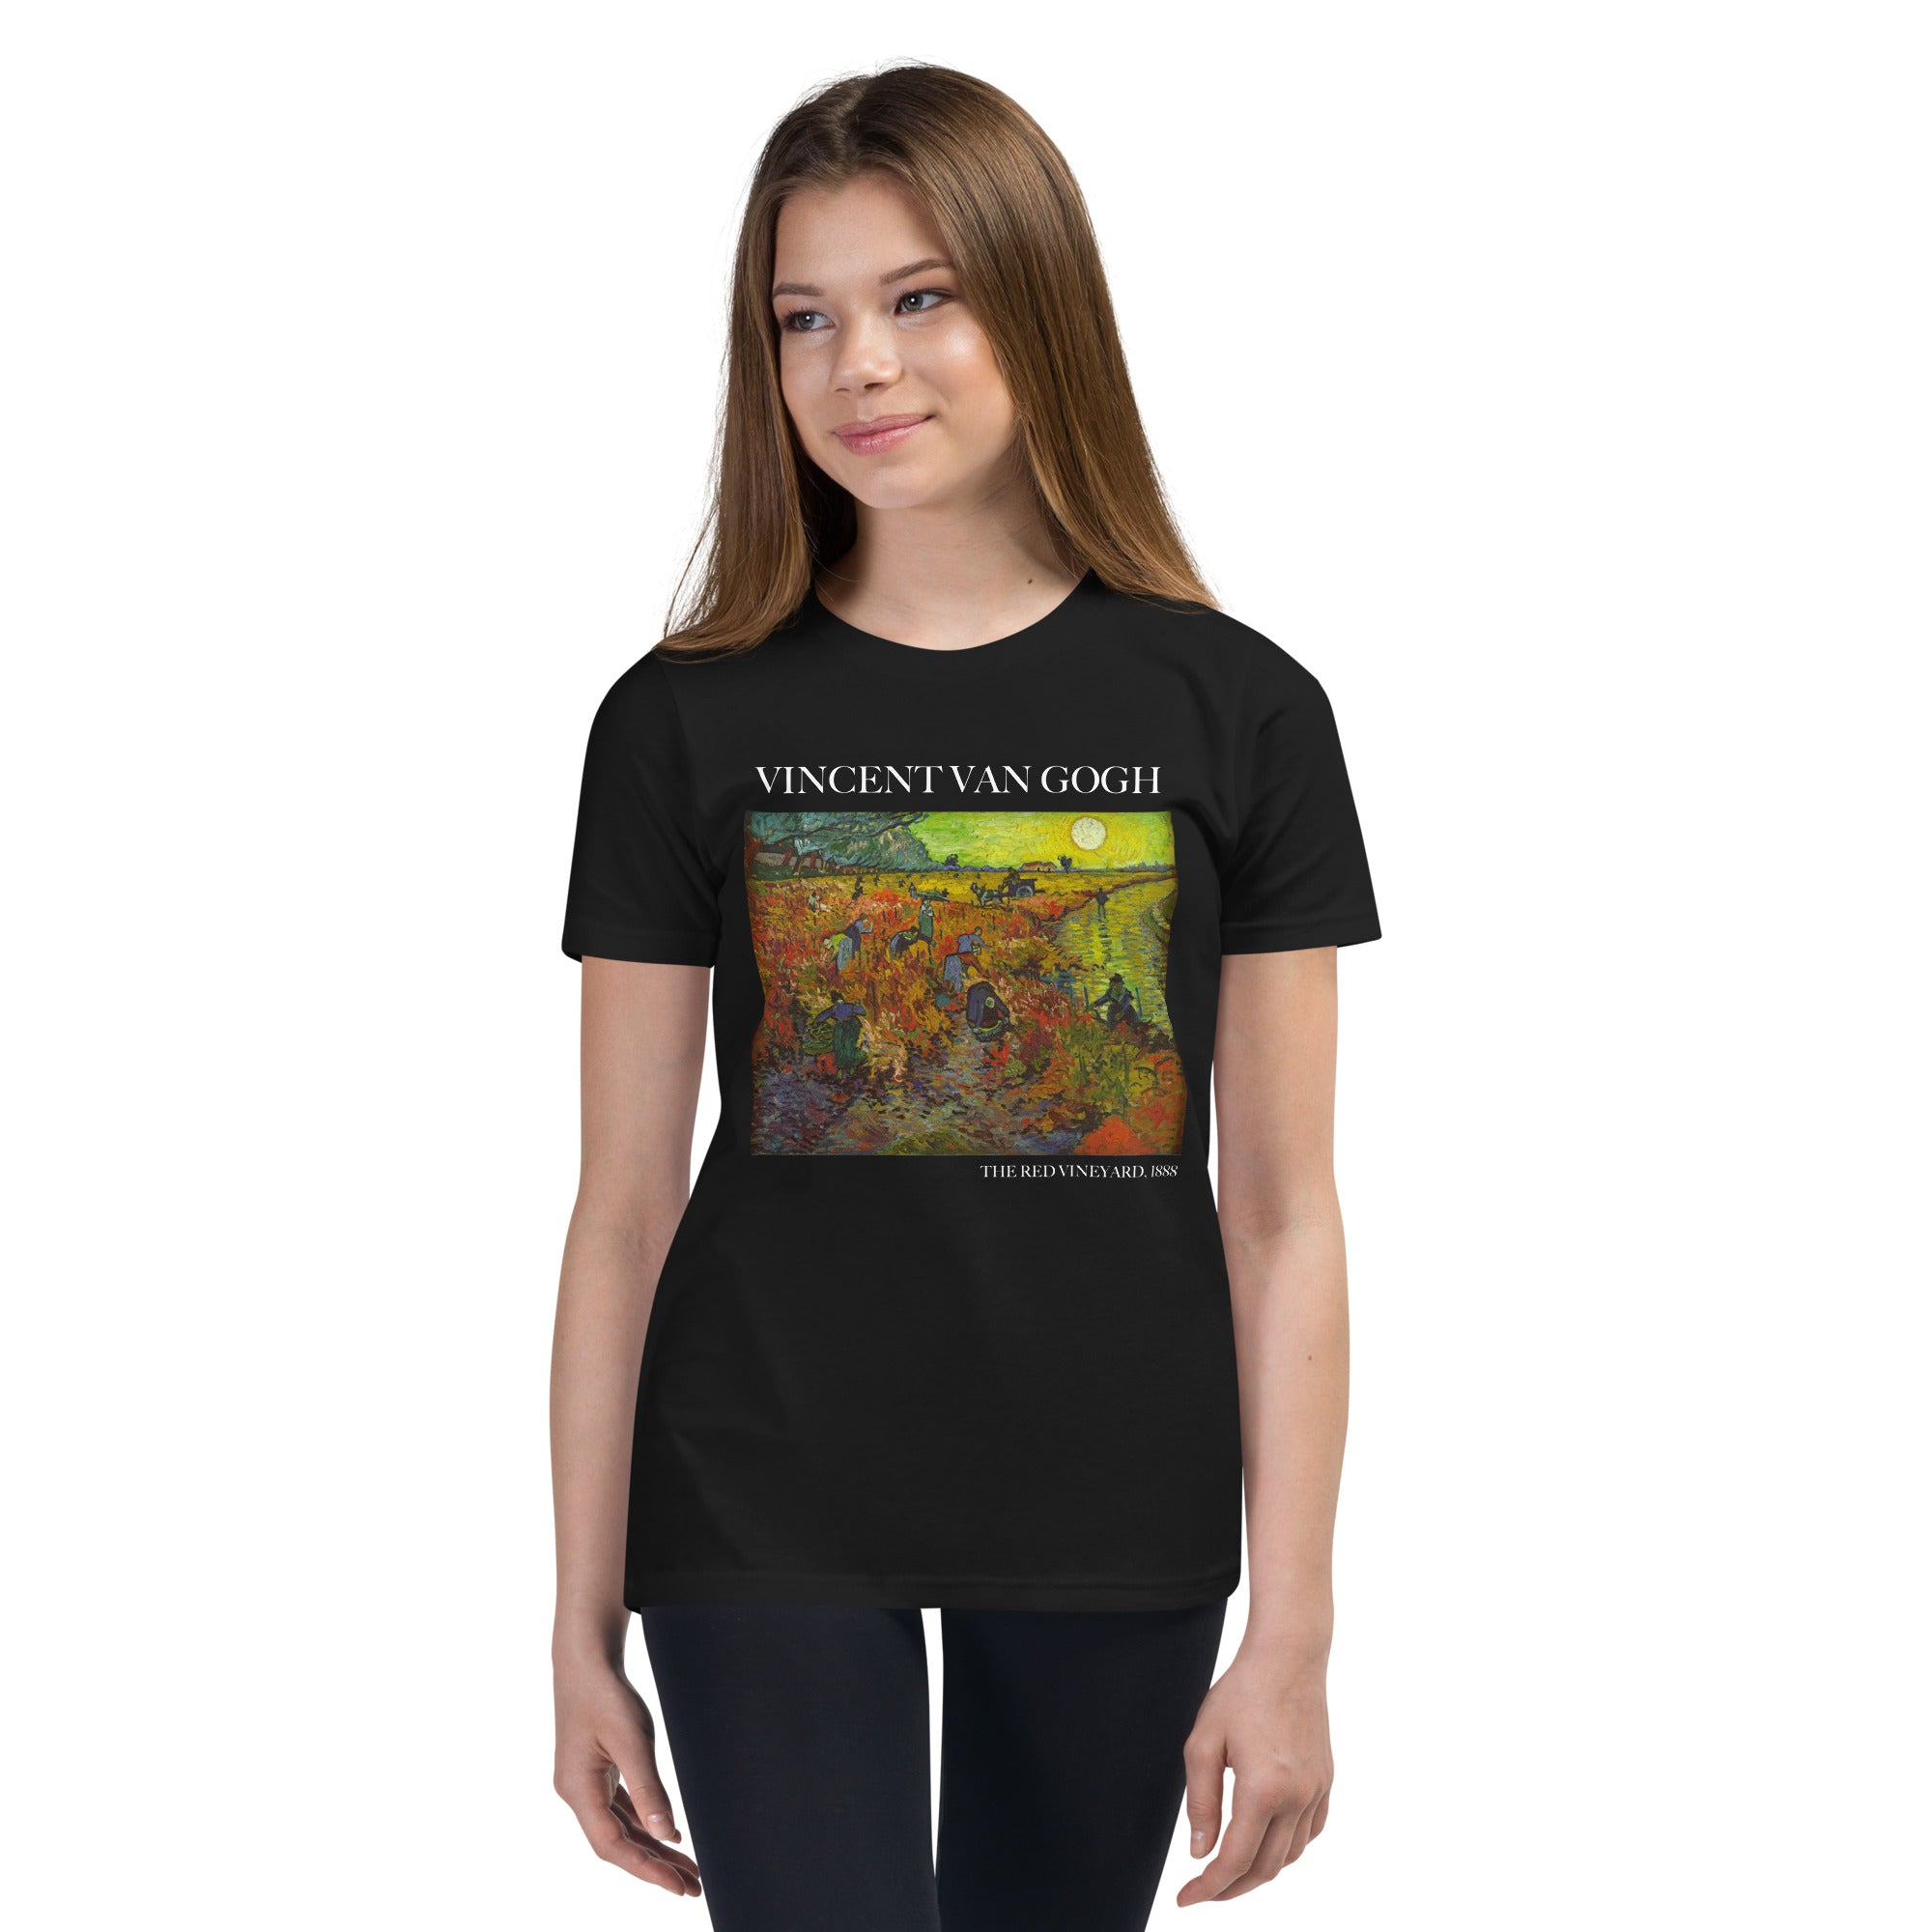 Vincent van Gogh 'The Red Vineyard' Famous Painting Short Sleeve T-Shirt | Premium Youth Art Tee